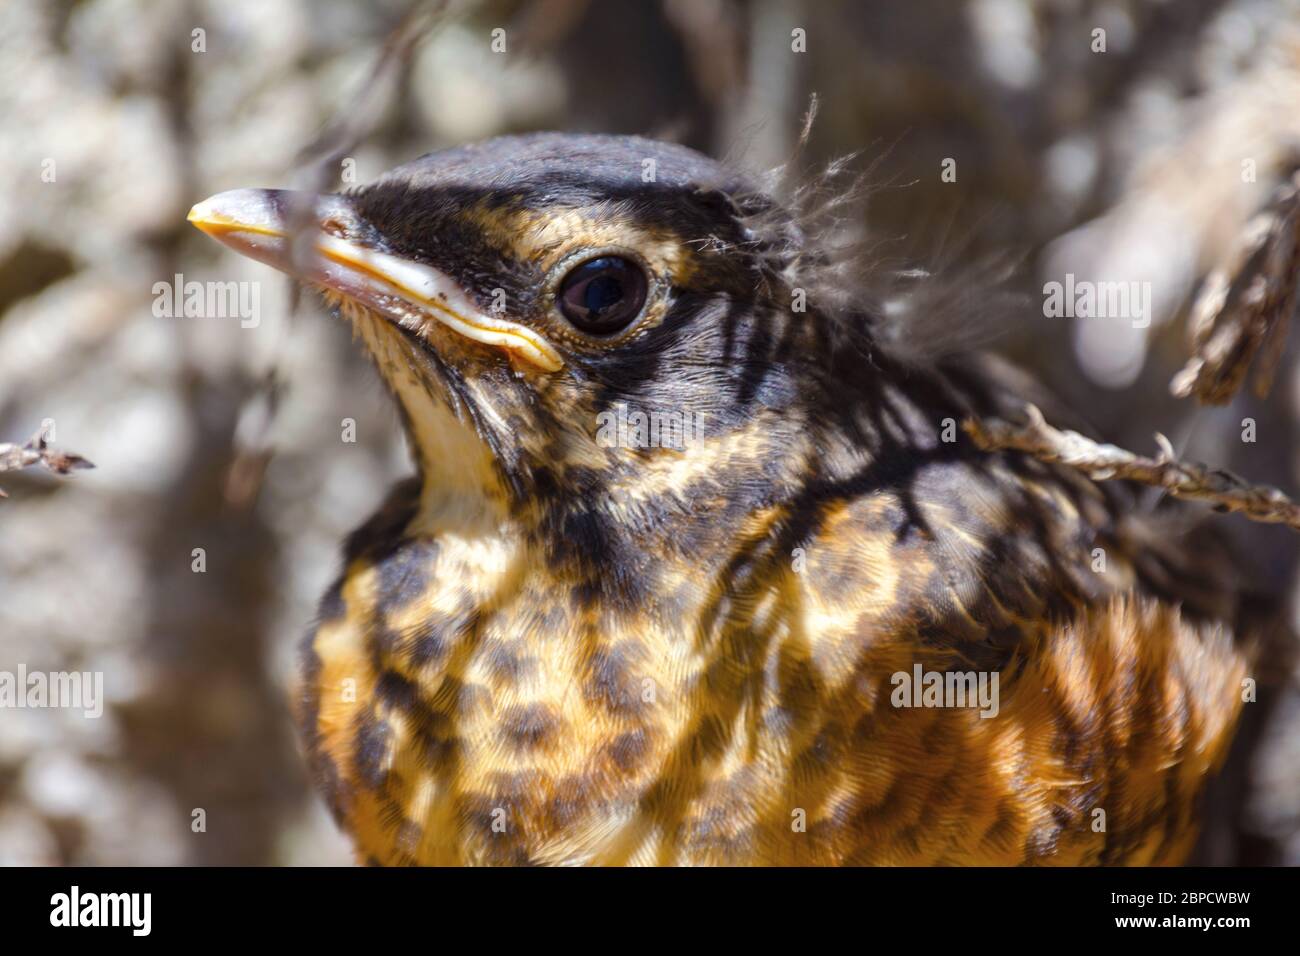 A close up view of a fledgling American Red Breasted Robin.  He is hiding under branches since leaving the nest prematurely. Stock Photo